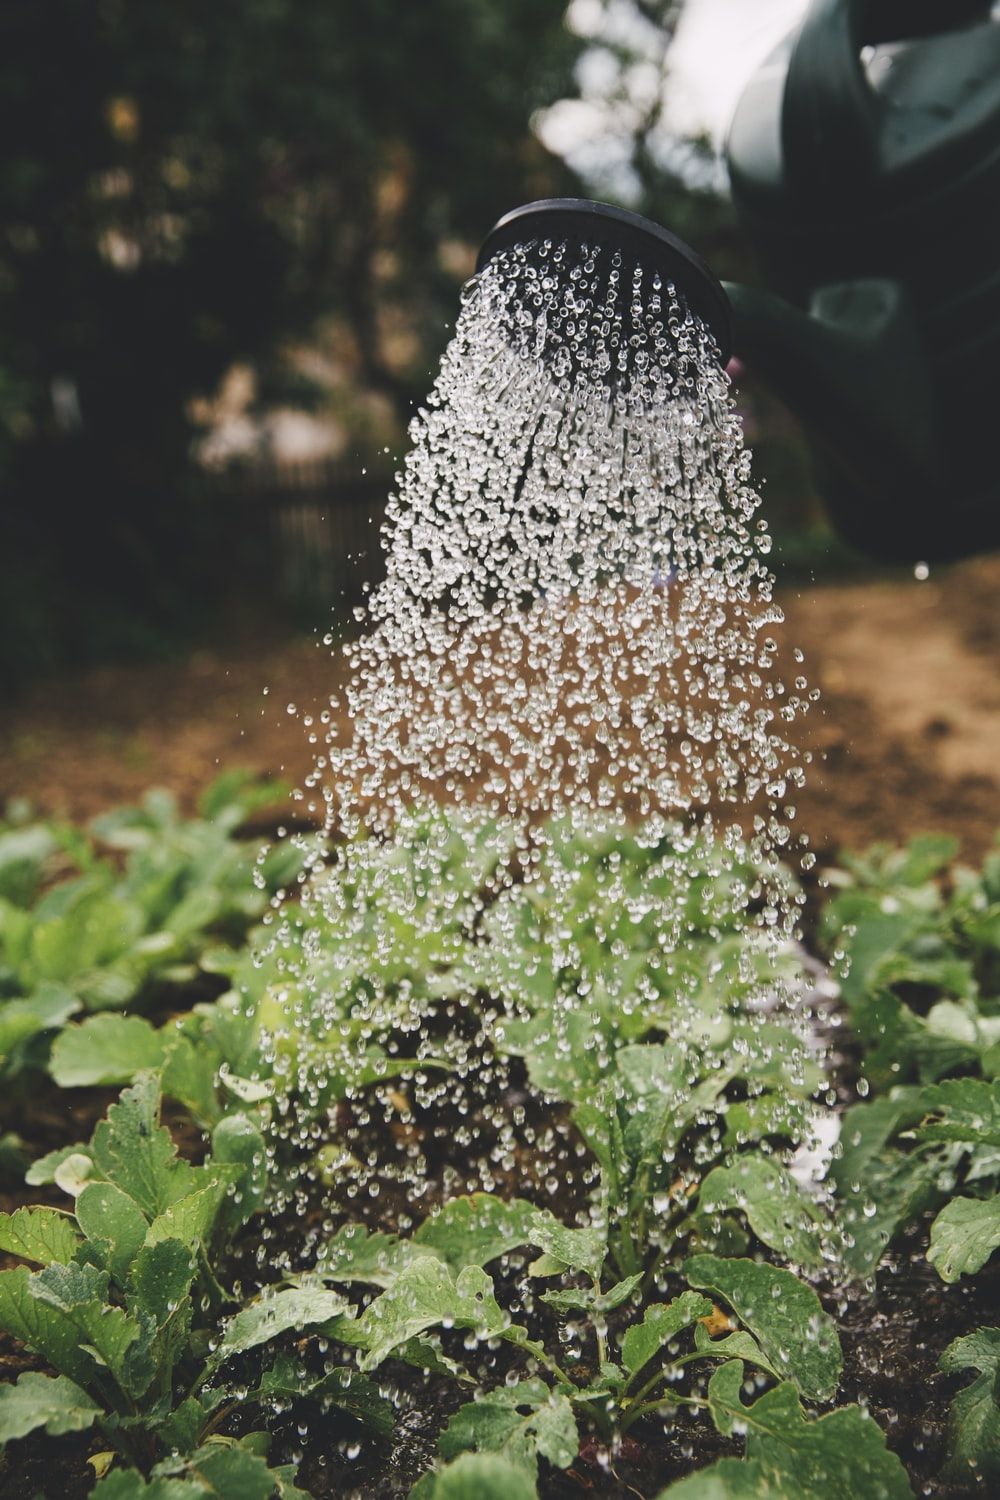 Watering Picture. Download Free Image